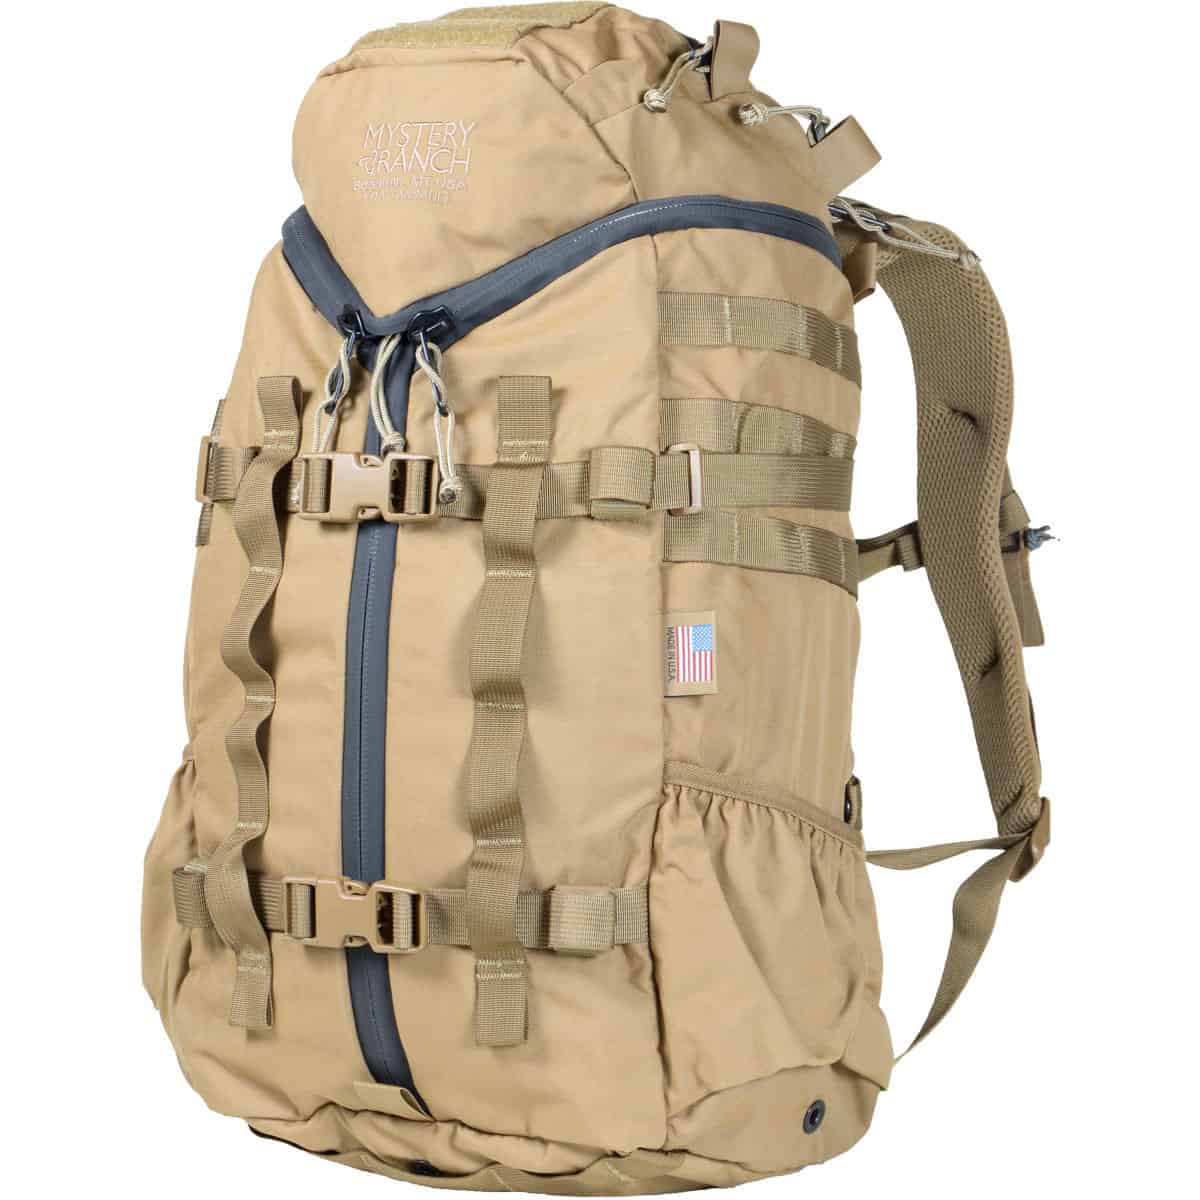 10 Best Bug Out Bags (Update 2022) Buyer's Guide Best Survival